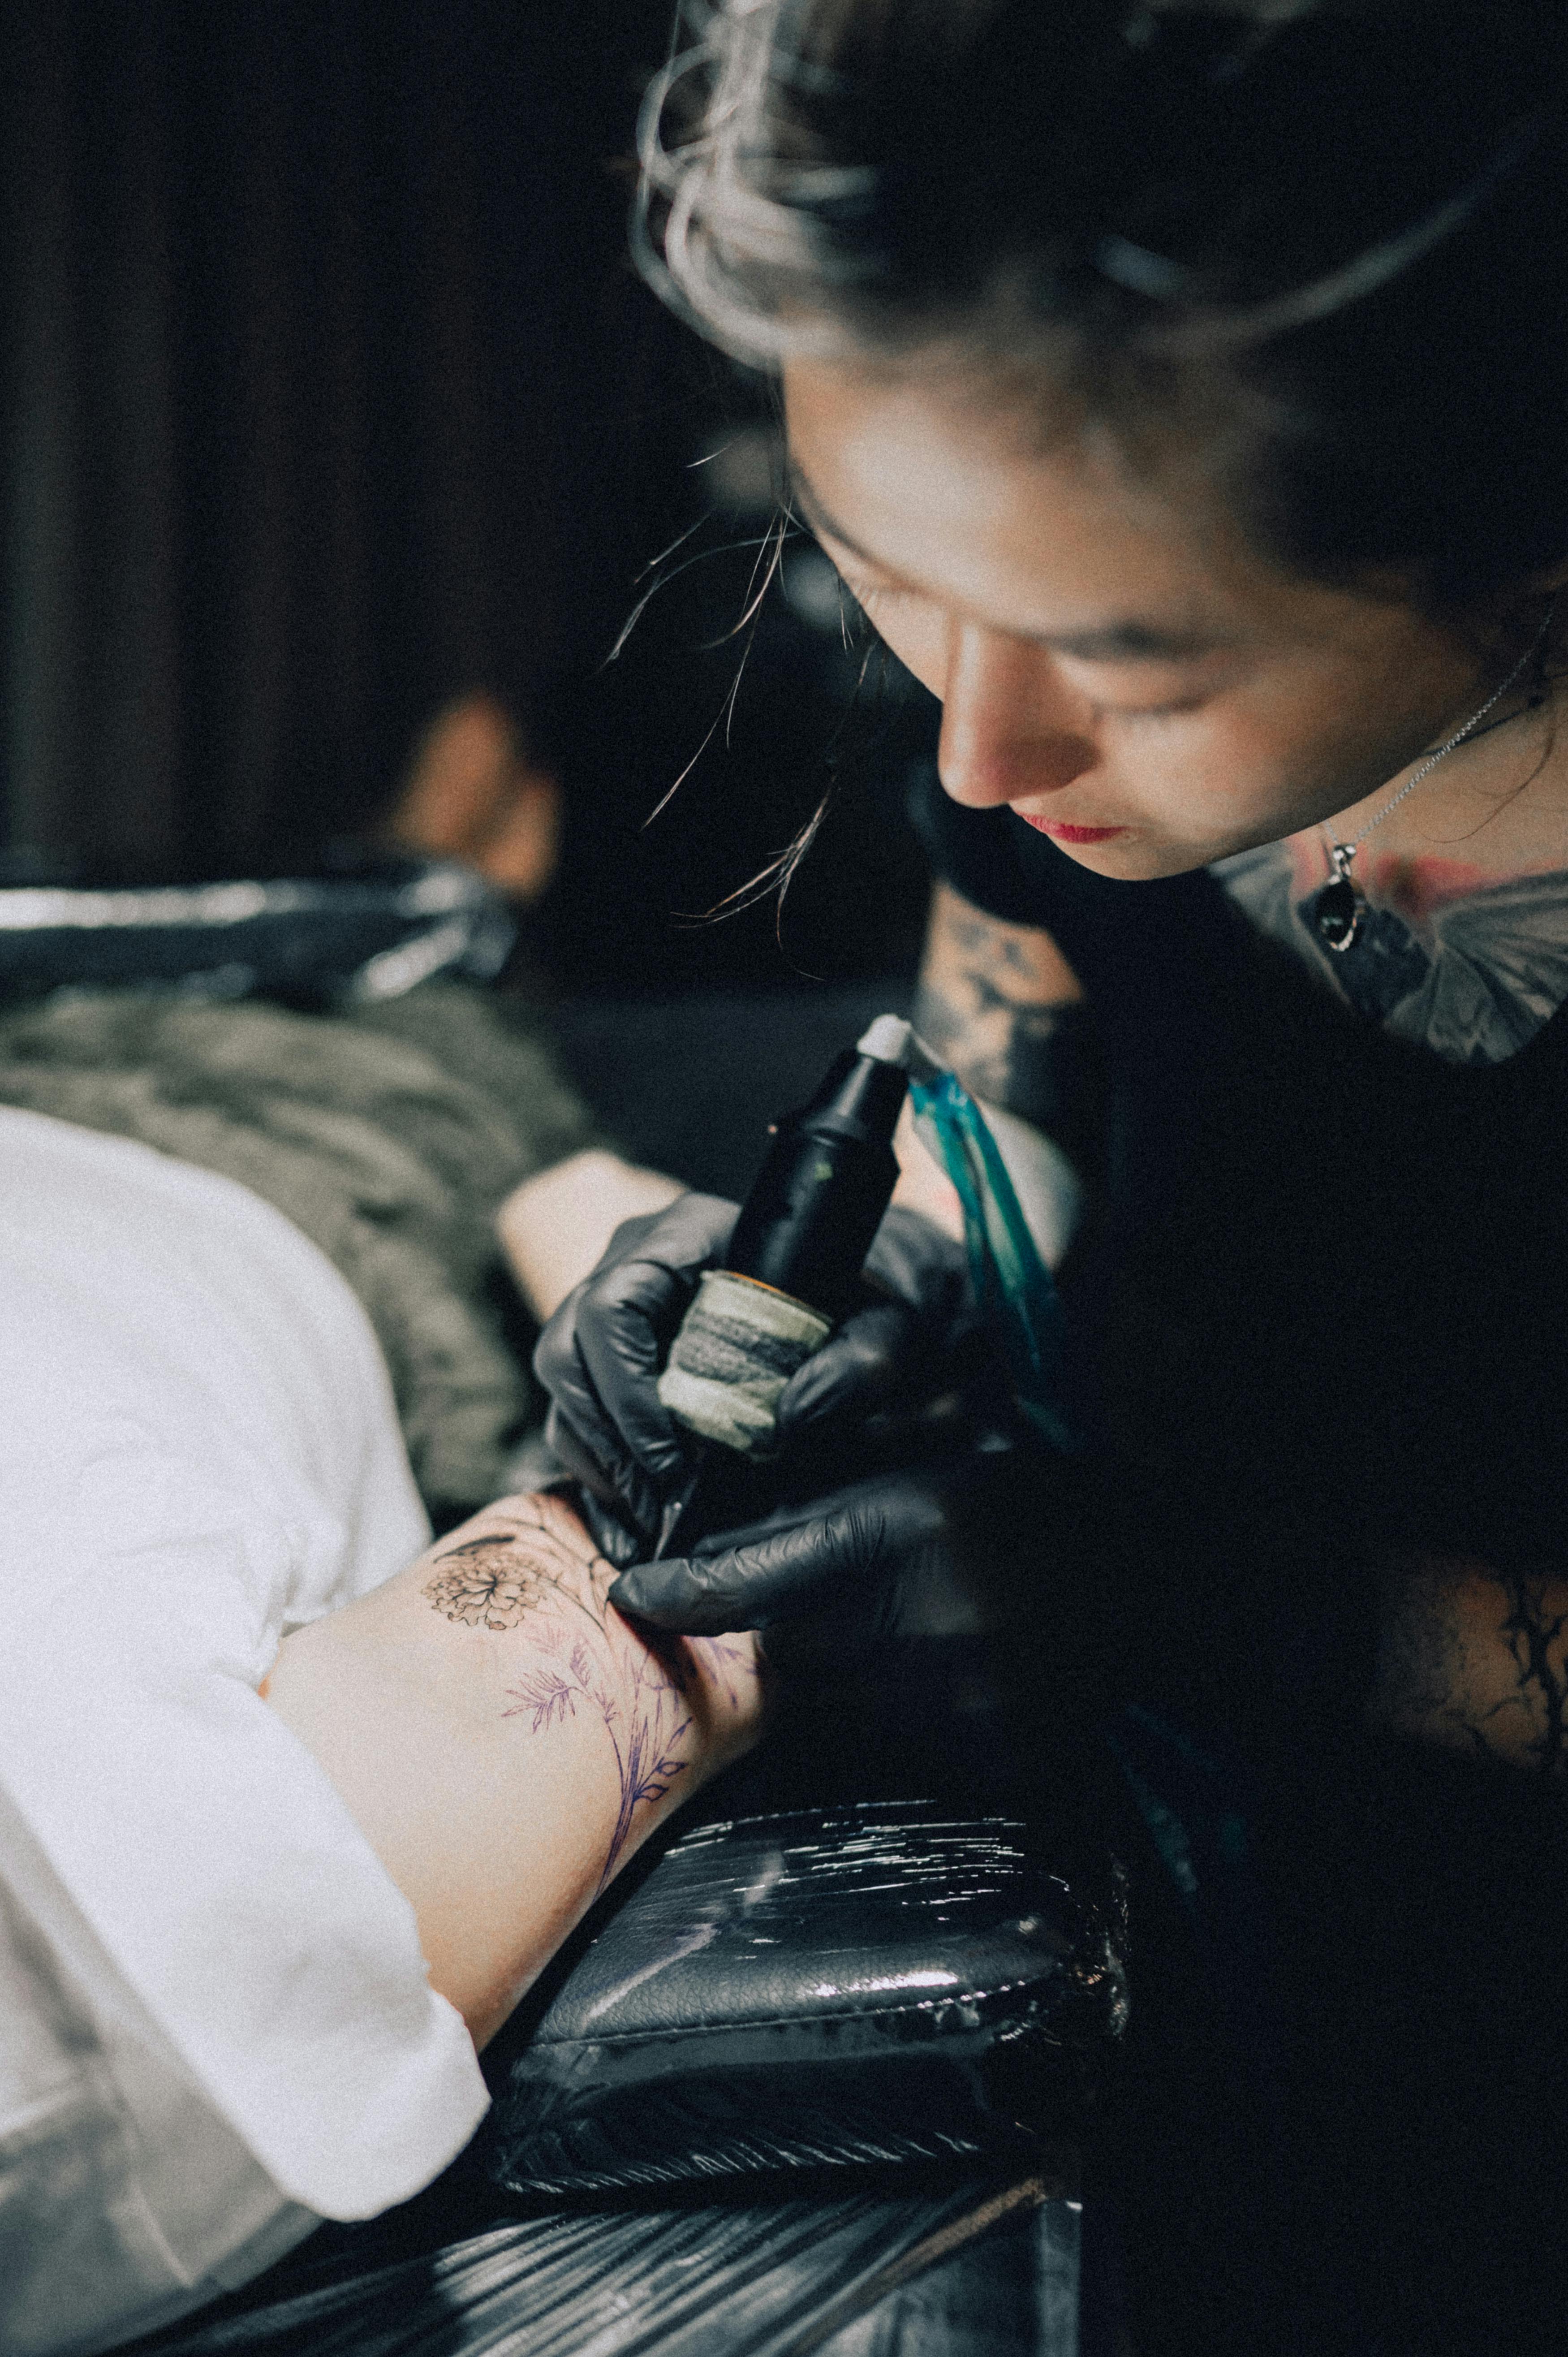 Southern New Jersey tattoo parlors see the rise of ladies of the ink